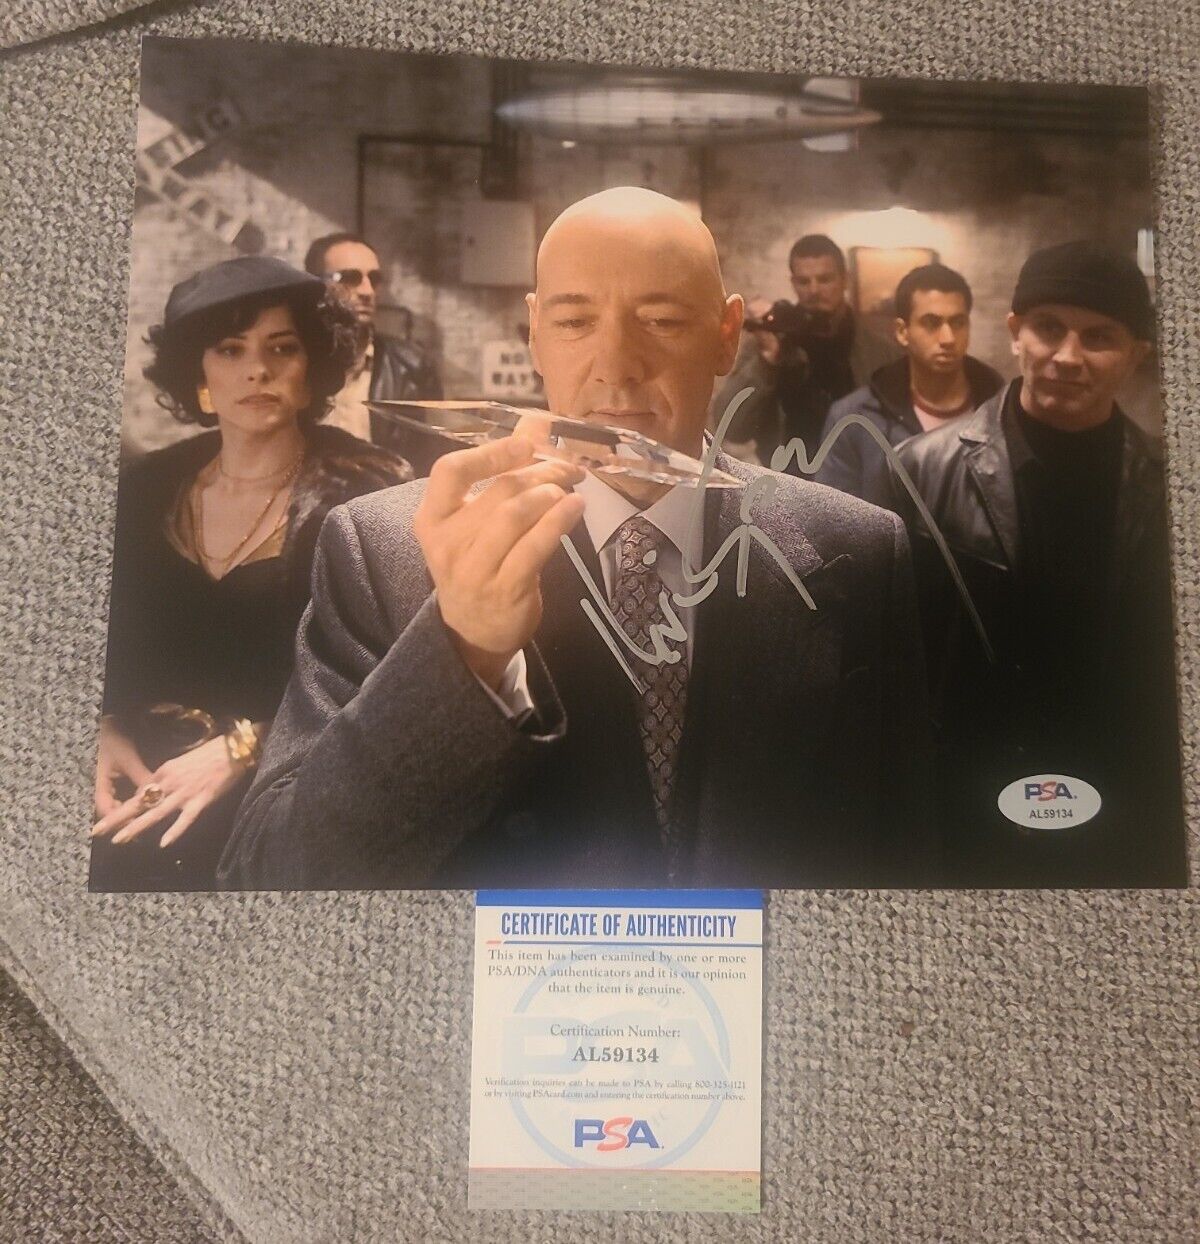 KEVIN SPACEY SUPERMAN RETURNS SIGNED 8X10 PHOTO PSA/DNA AUTHENTICATED#AL59134